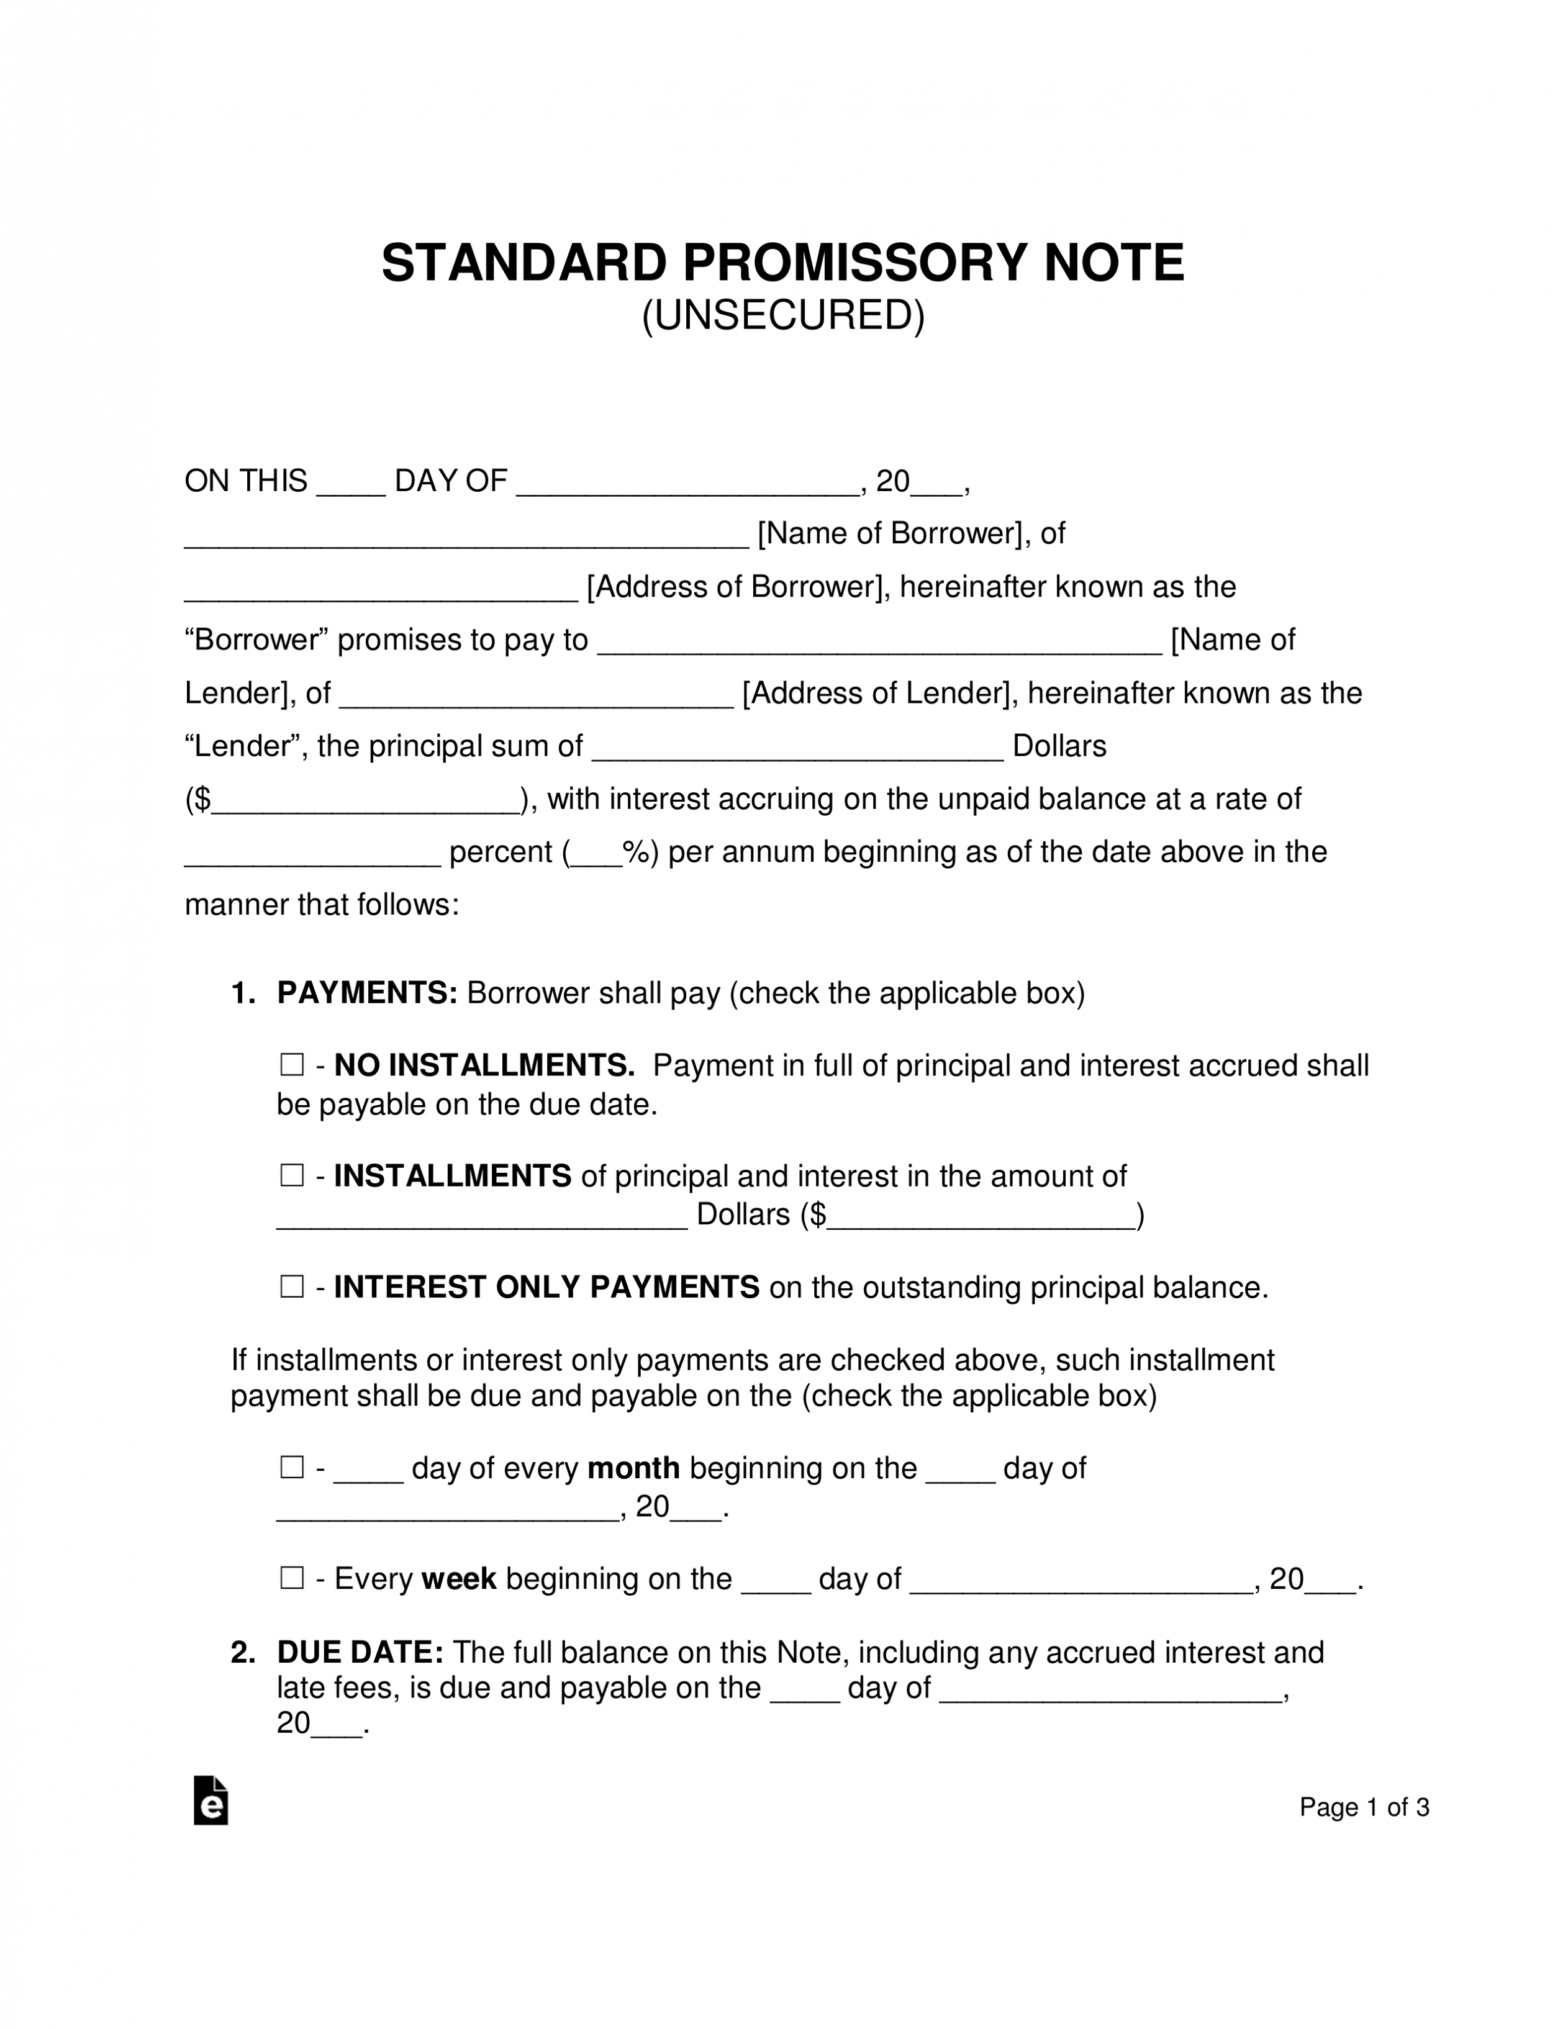 Free Unsecured Promissory Note Template - Word | Pdf | Eforms within Unsecured Note Template